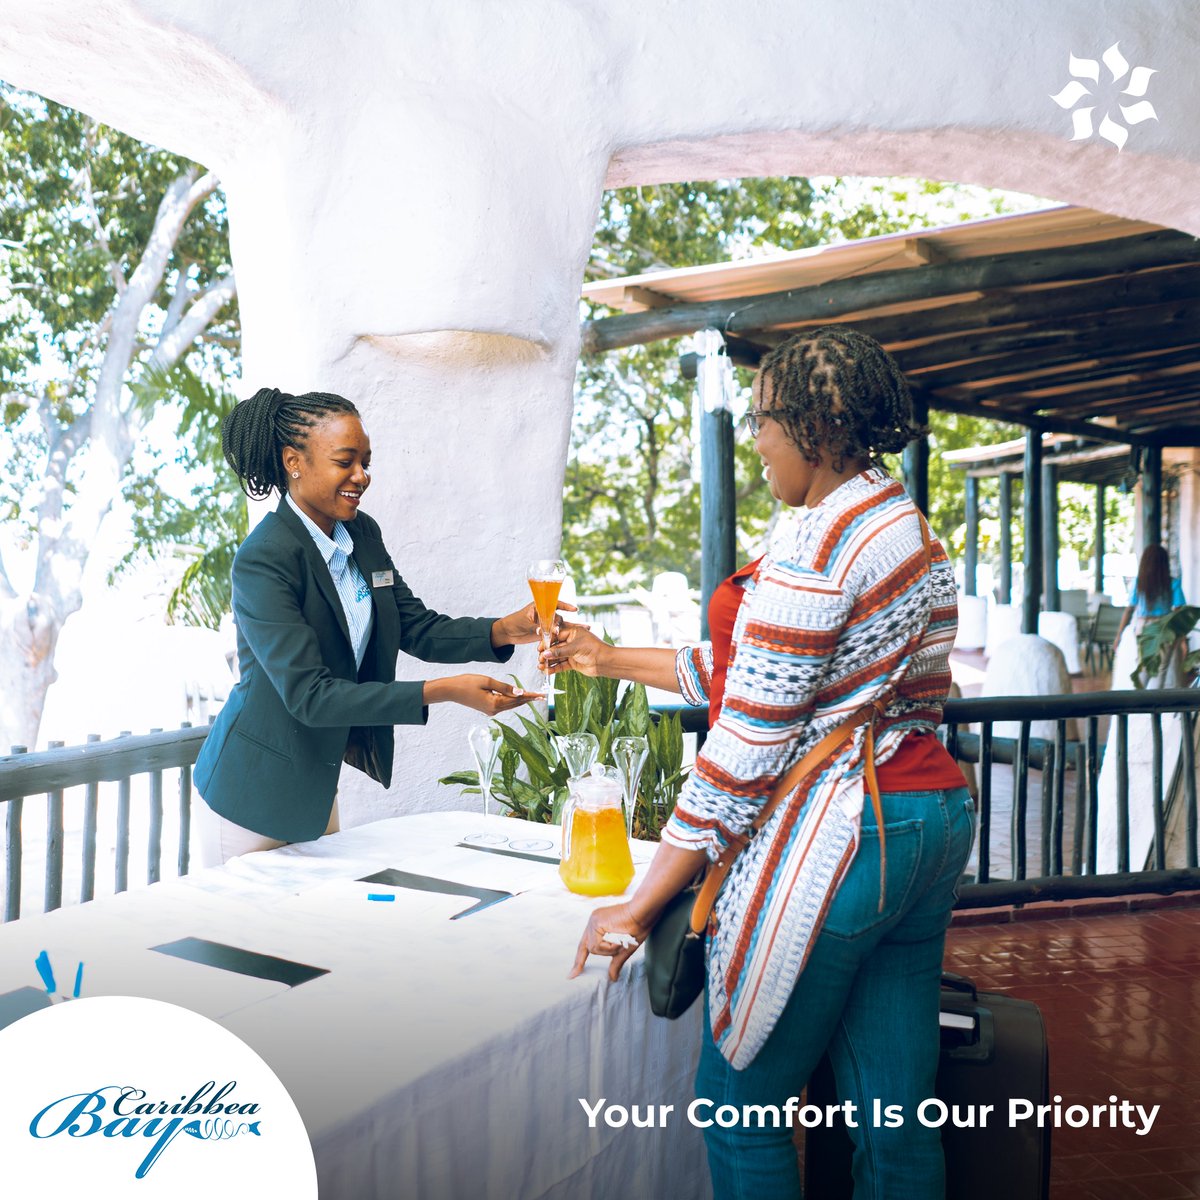 No matter the time, our resort's 24-hour help desk and premium facilities are here to provide you with unmatched service and convenience.​

Find out more about our facilities on:​

WhatsApp +263 787 122 004​

#CaribbeaBay #ExperienceExploreEnjoy #ComfortableStay